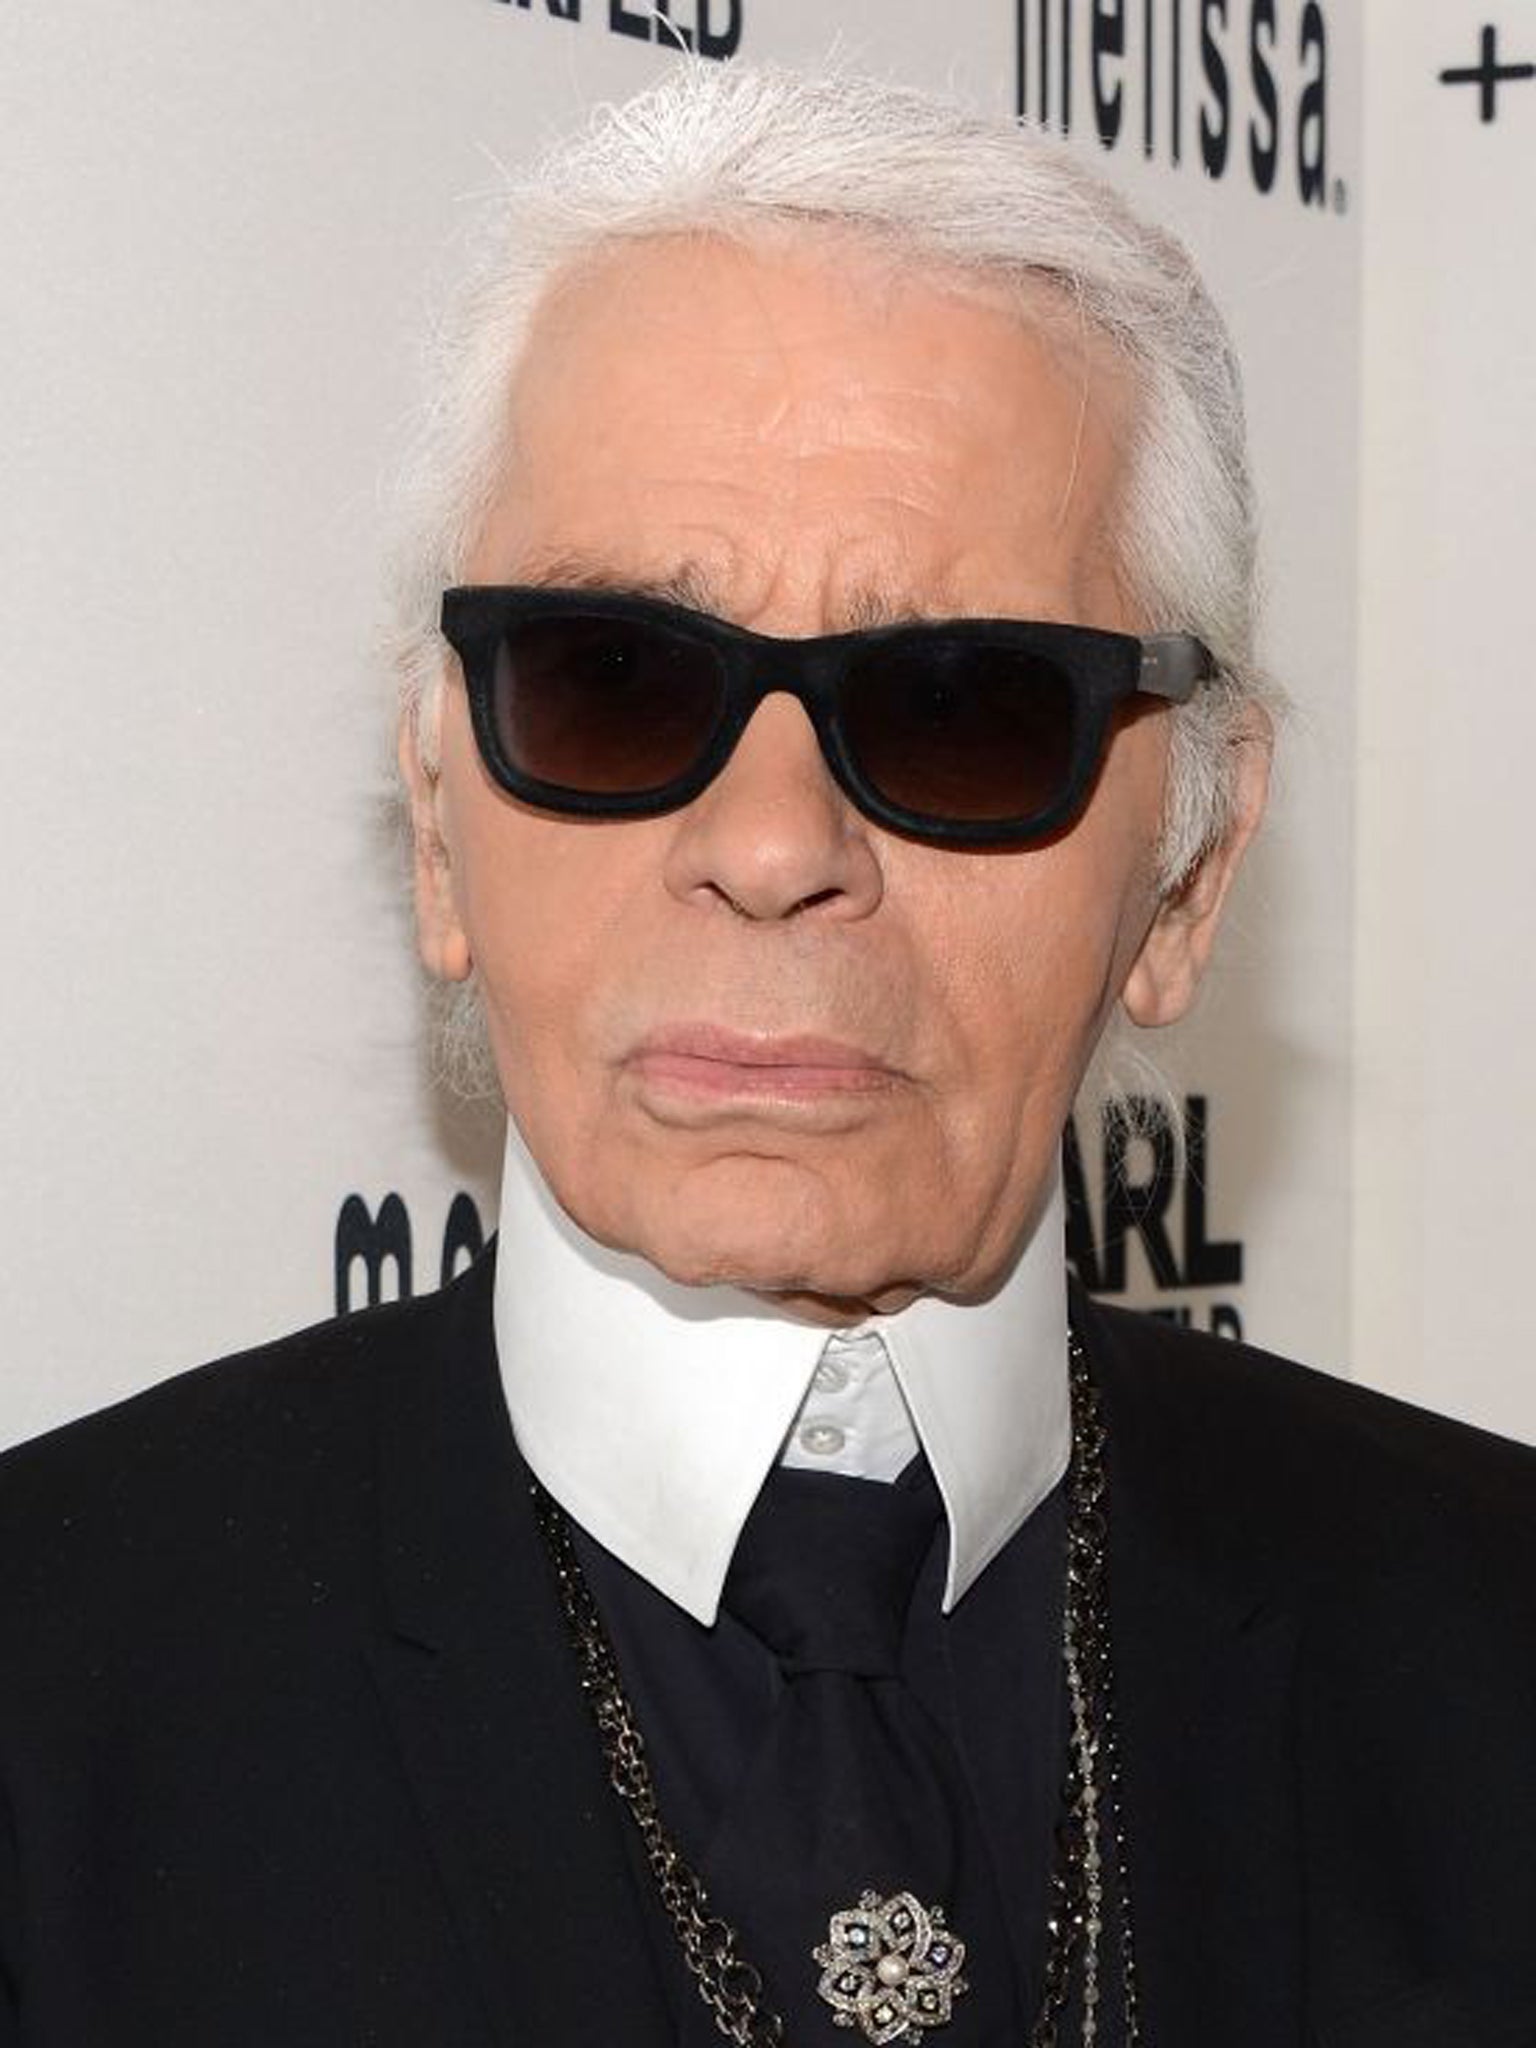 Karl Lagerfeld says he wants to get married to his cat | The Independent | The Independent